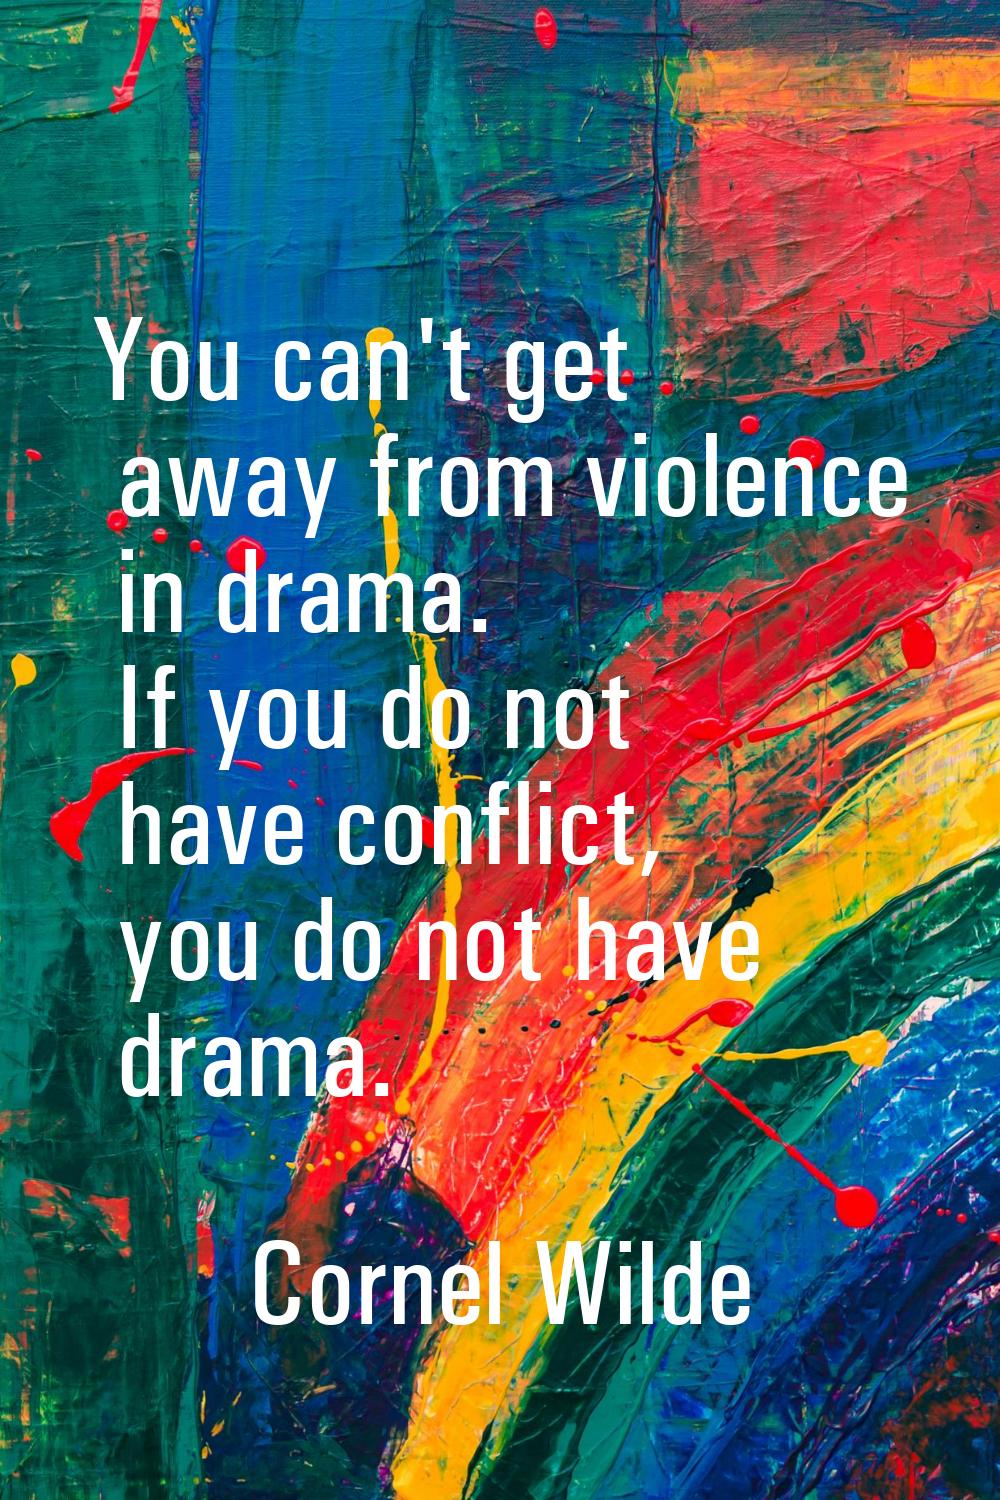 You can't get away from violence in drama. If you do not have conflict, you do not have drama.